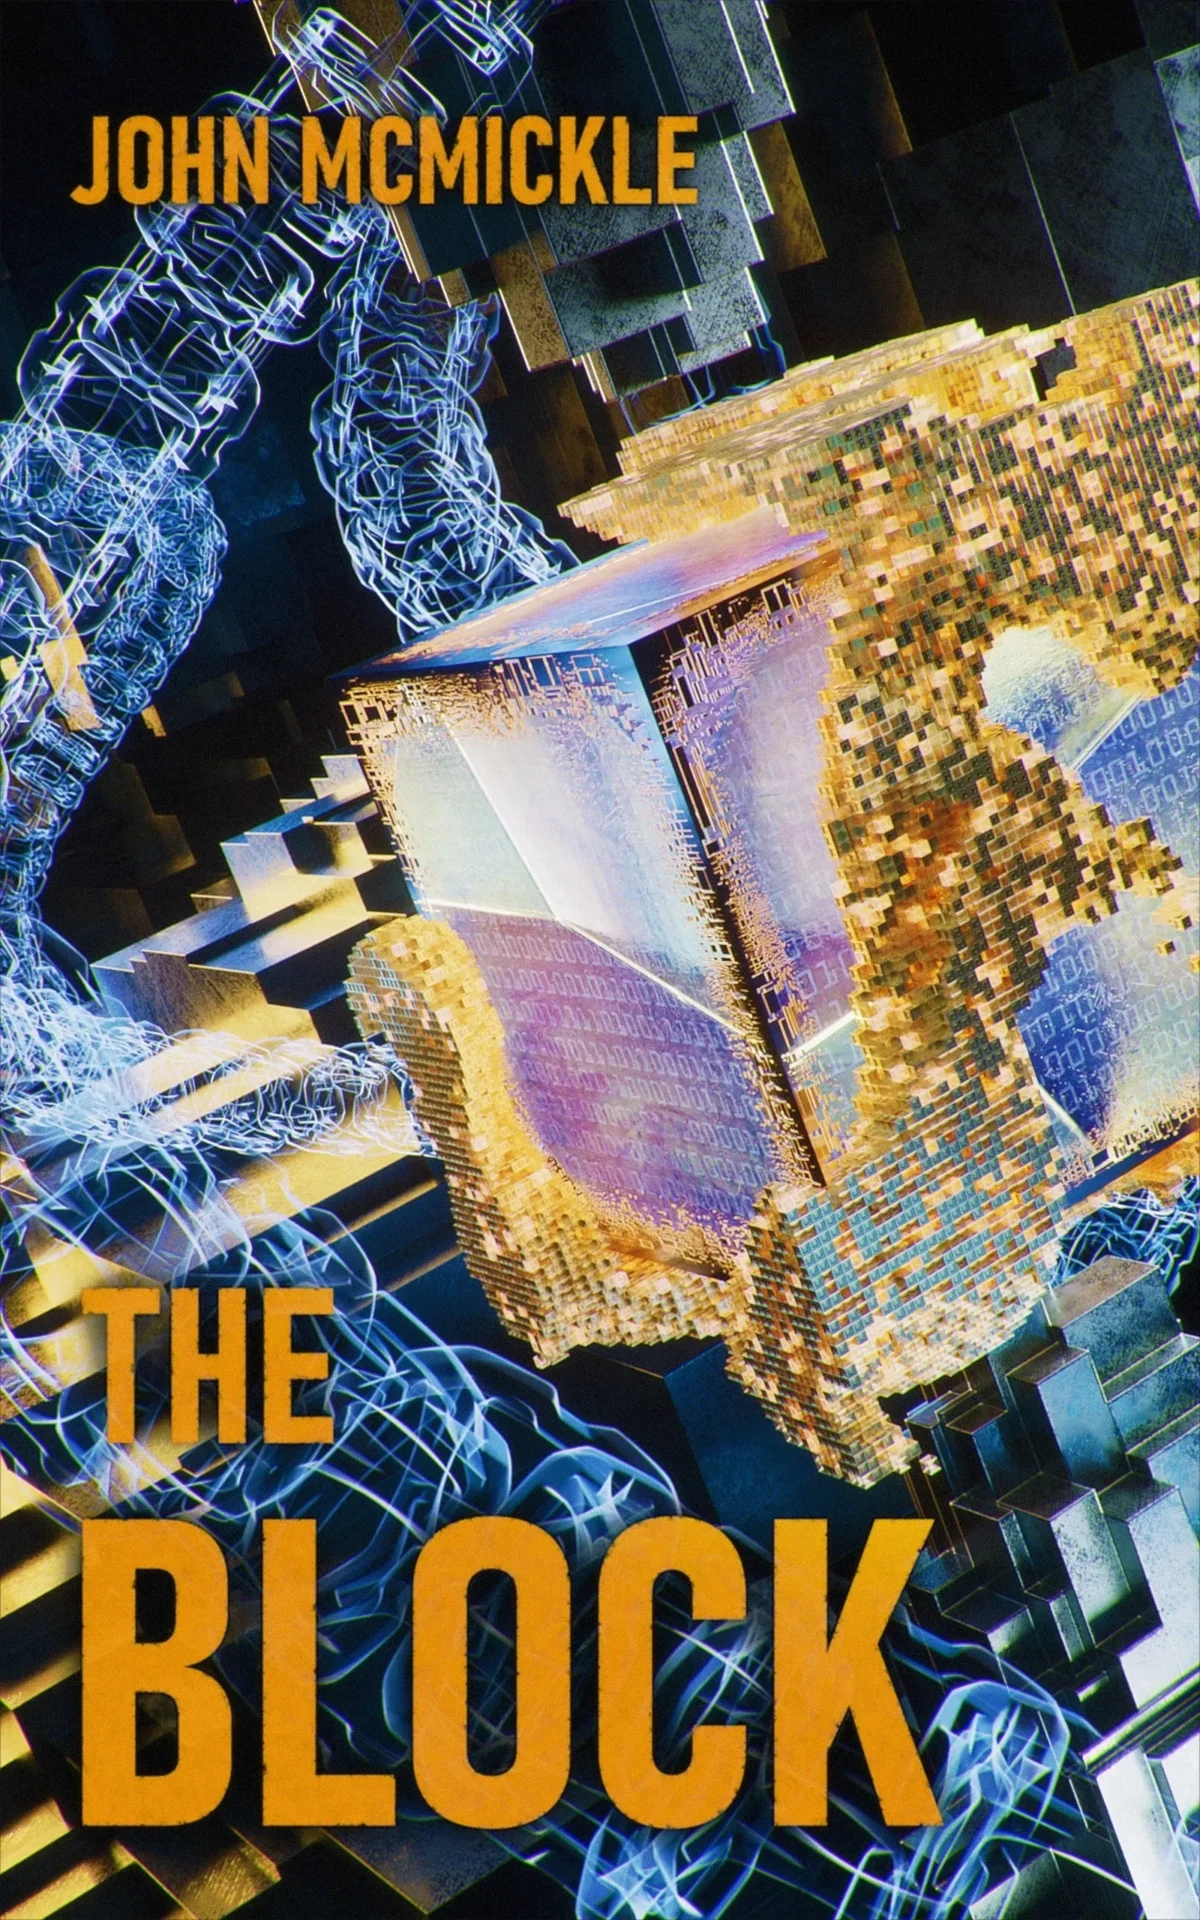 A book cover with the title of " the block ".